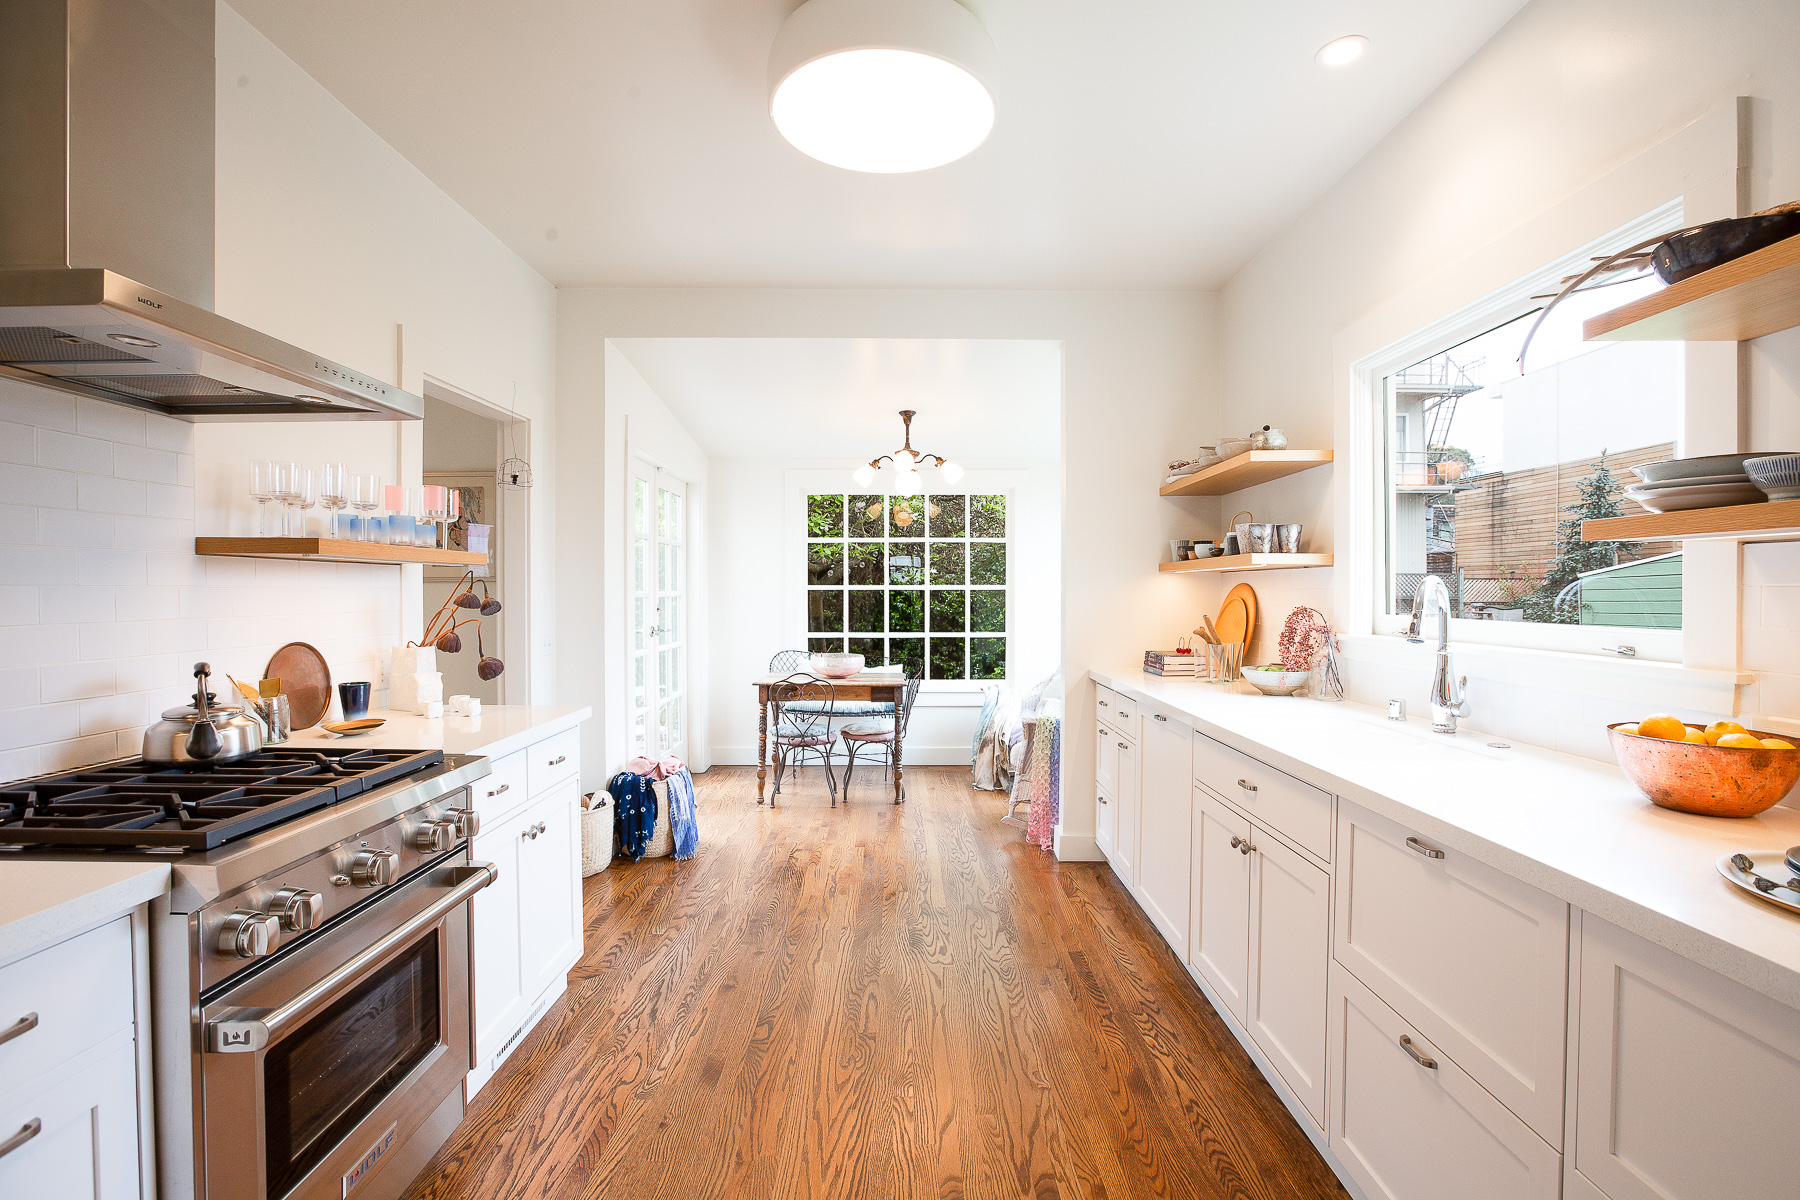 Property Photo: View of the kitchen at 78 Harper Street, featuring wood floors